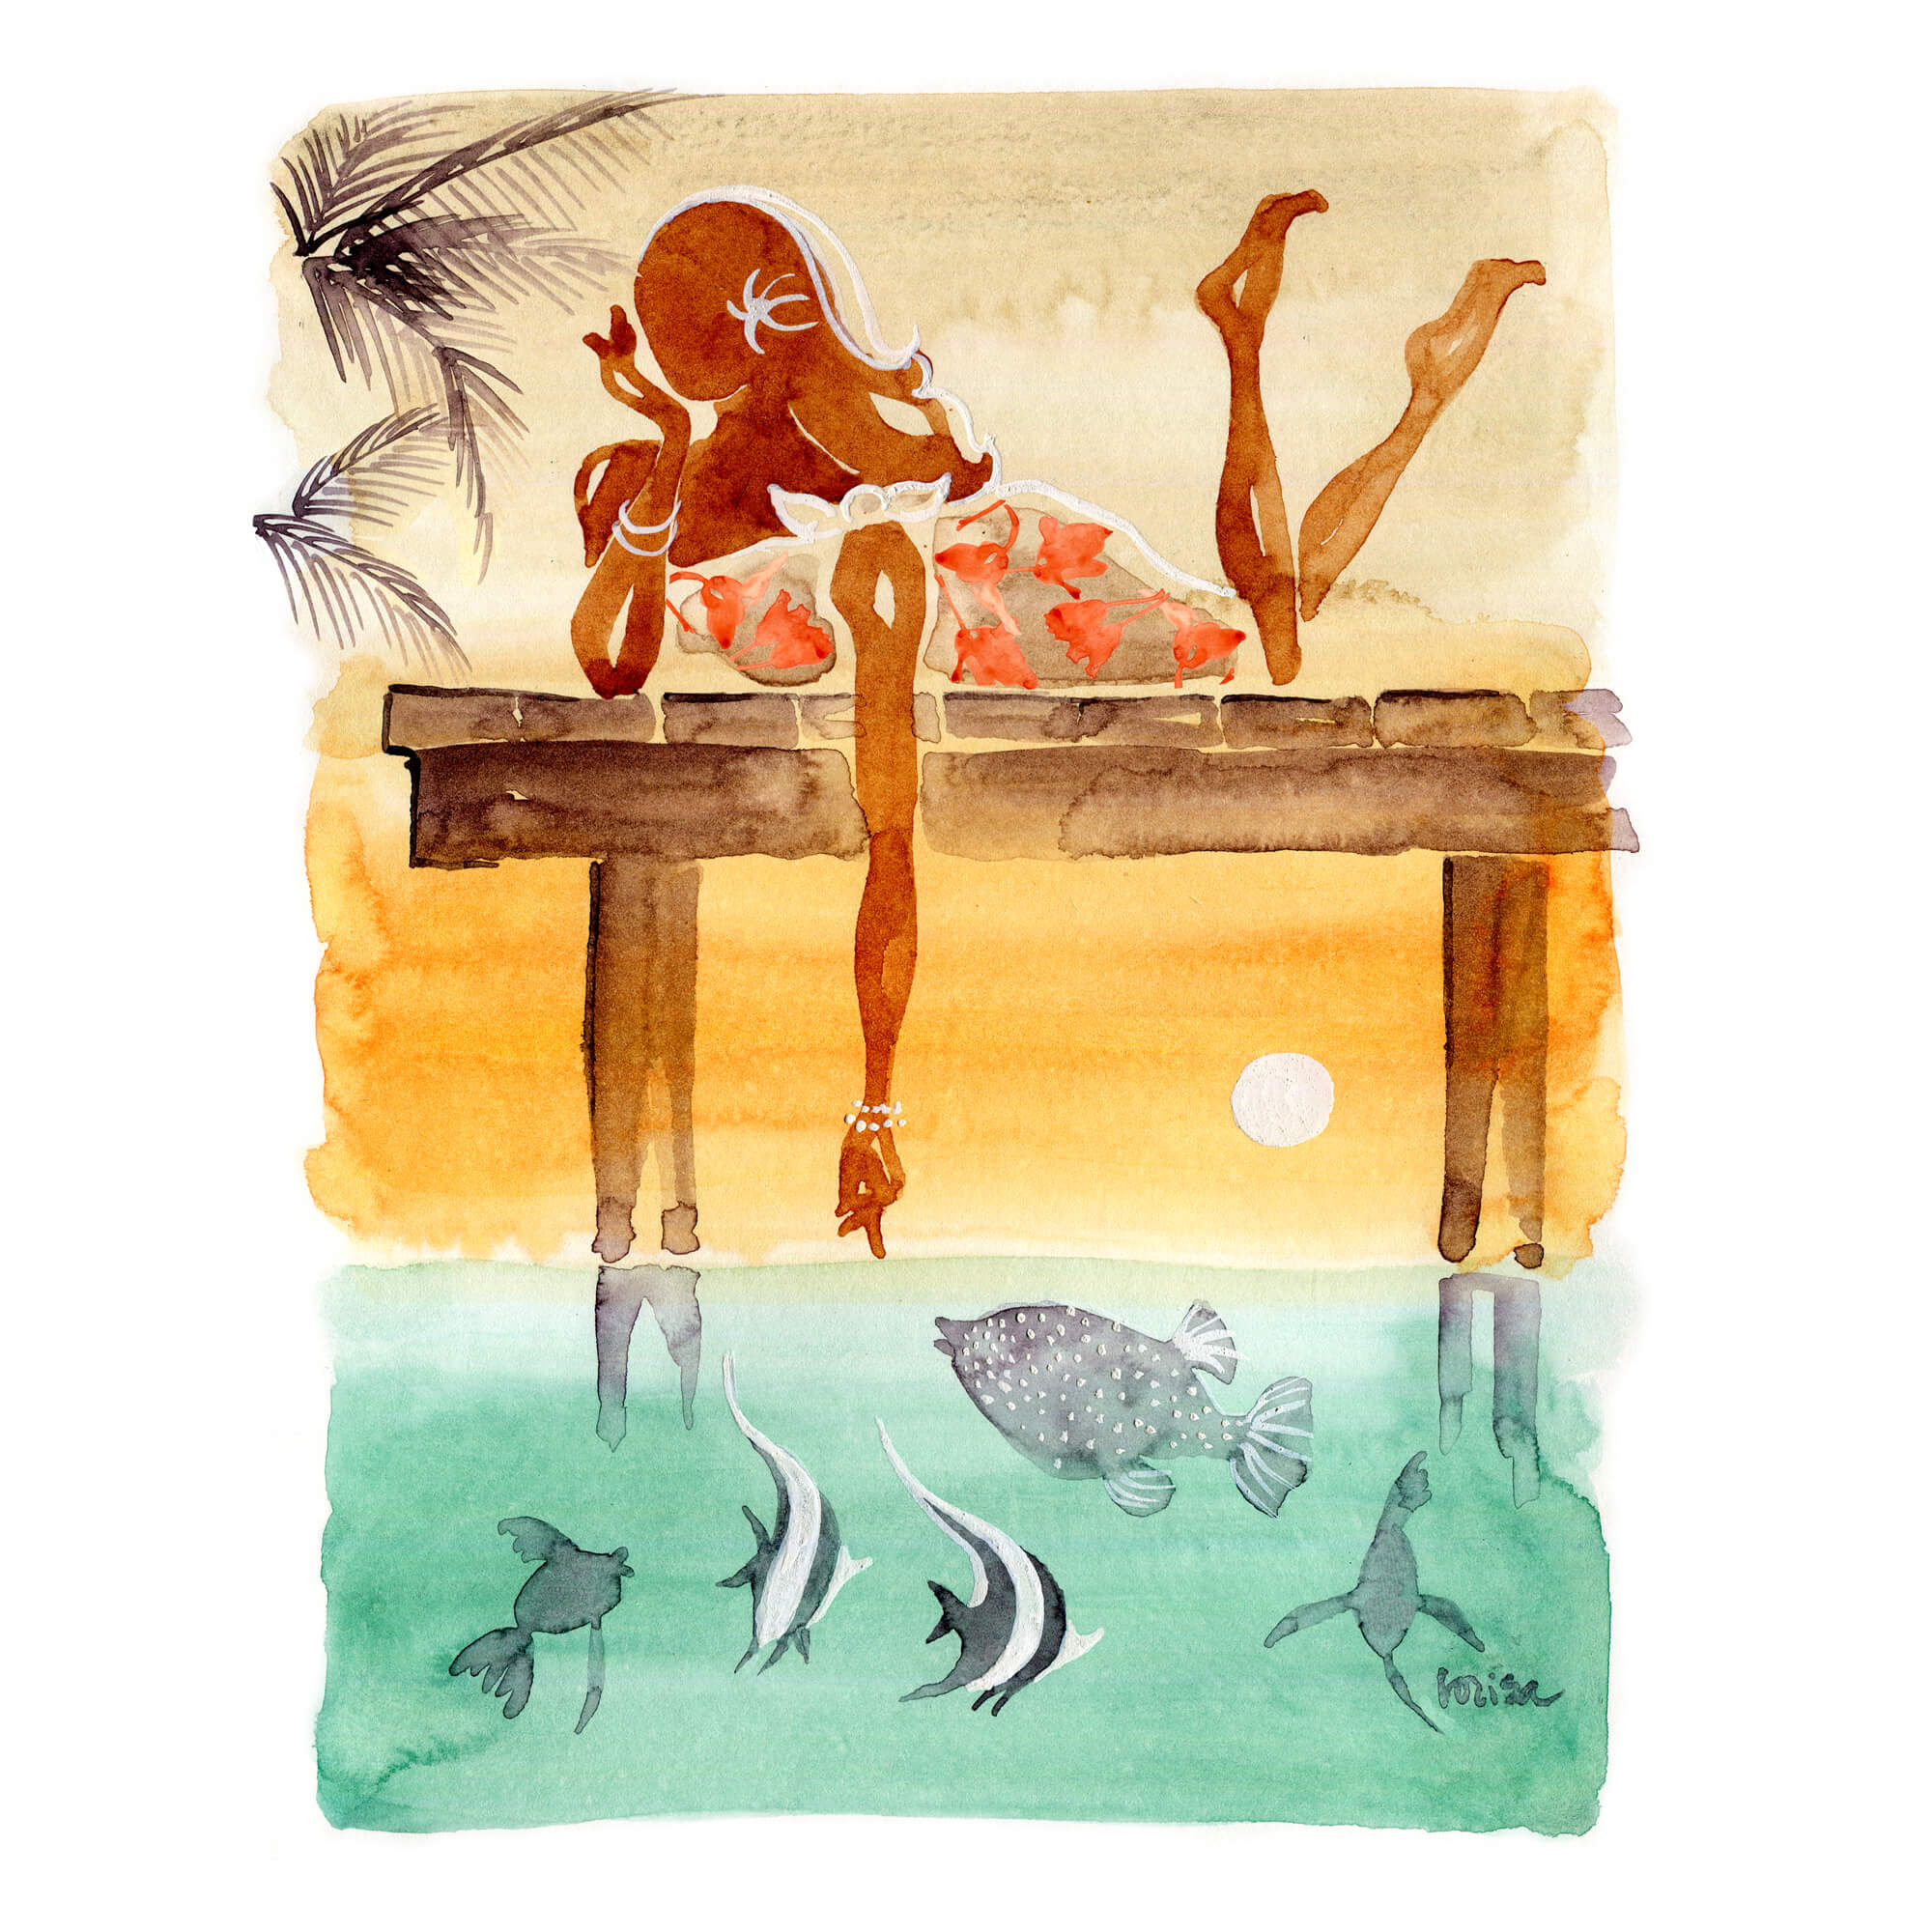 A paper giclée print of a watercolor artwork featuring a woman enjoying the colorful sunset by Hawaii artist Lovisa Oliv